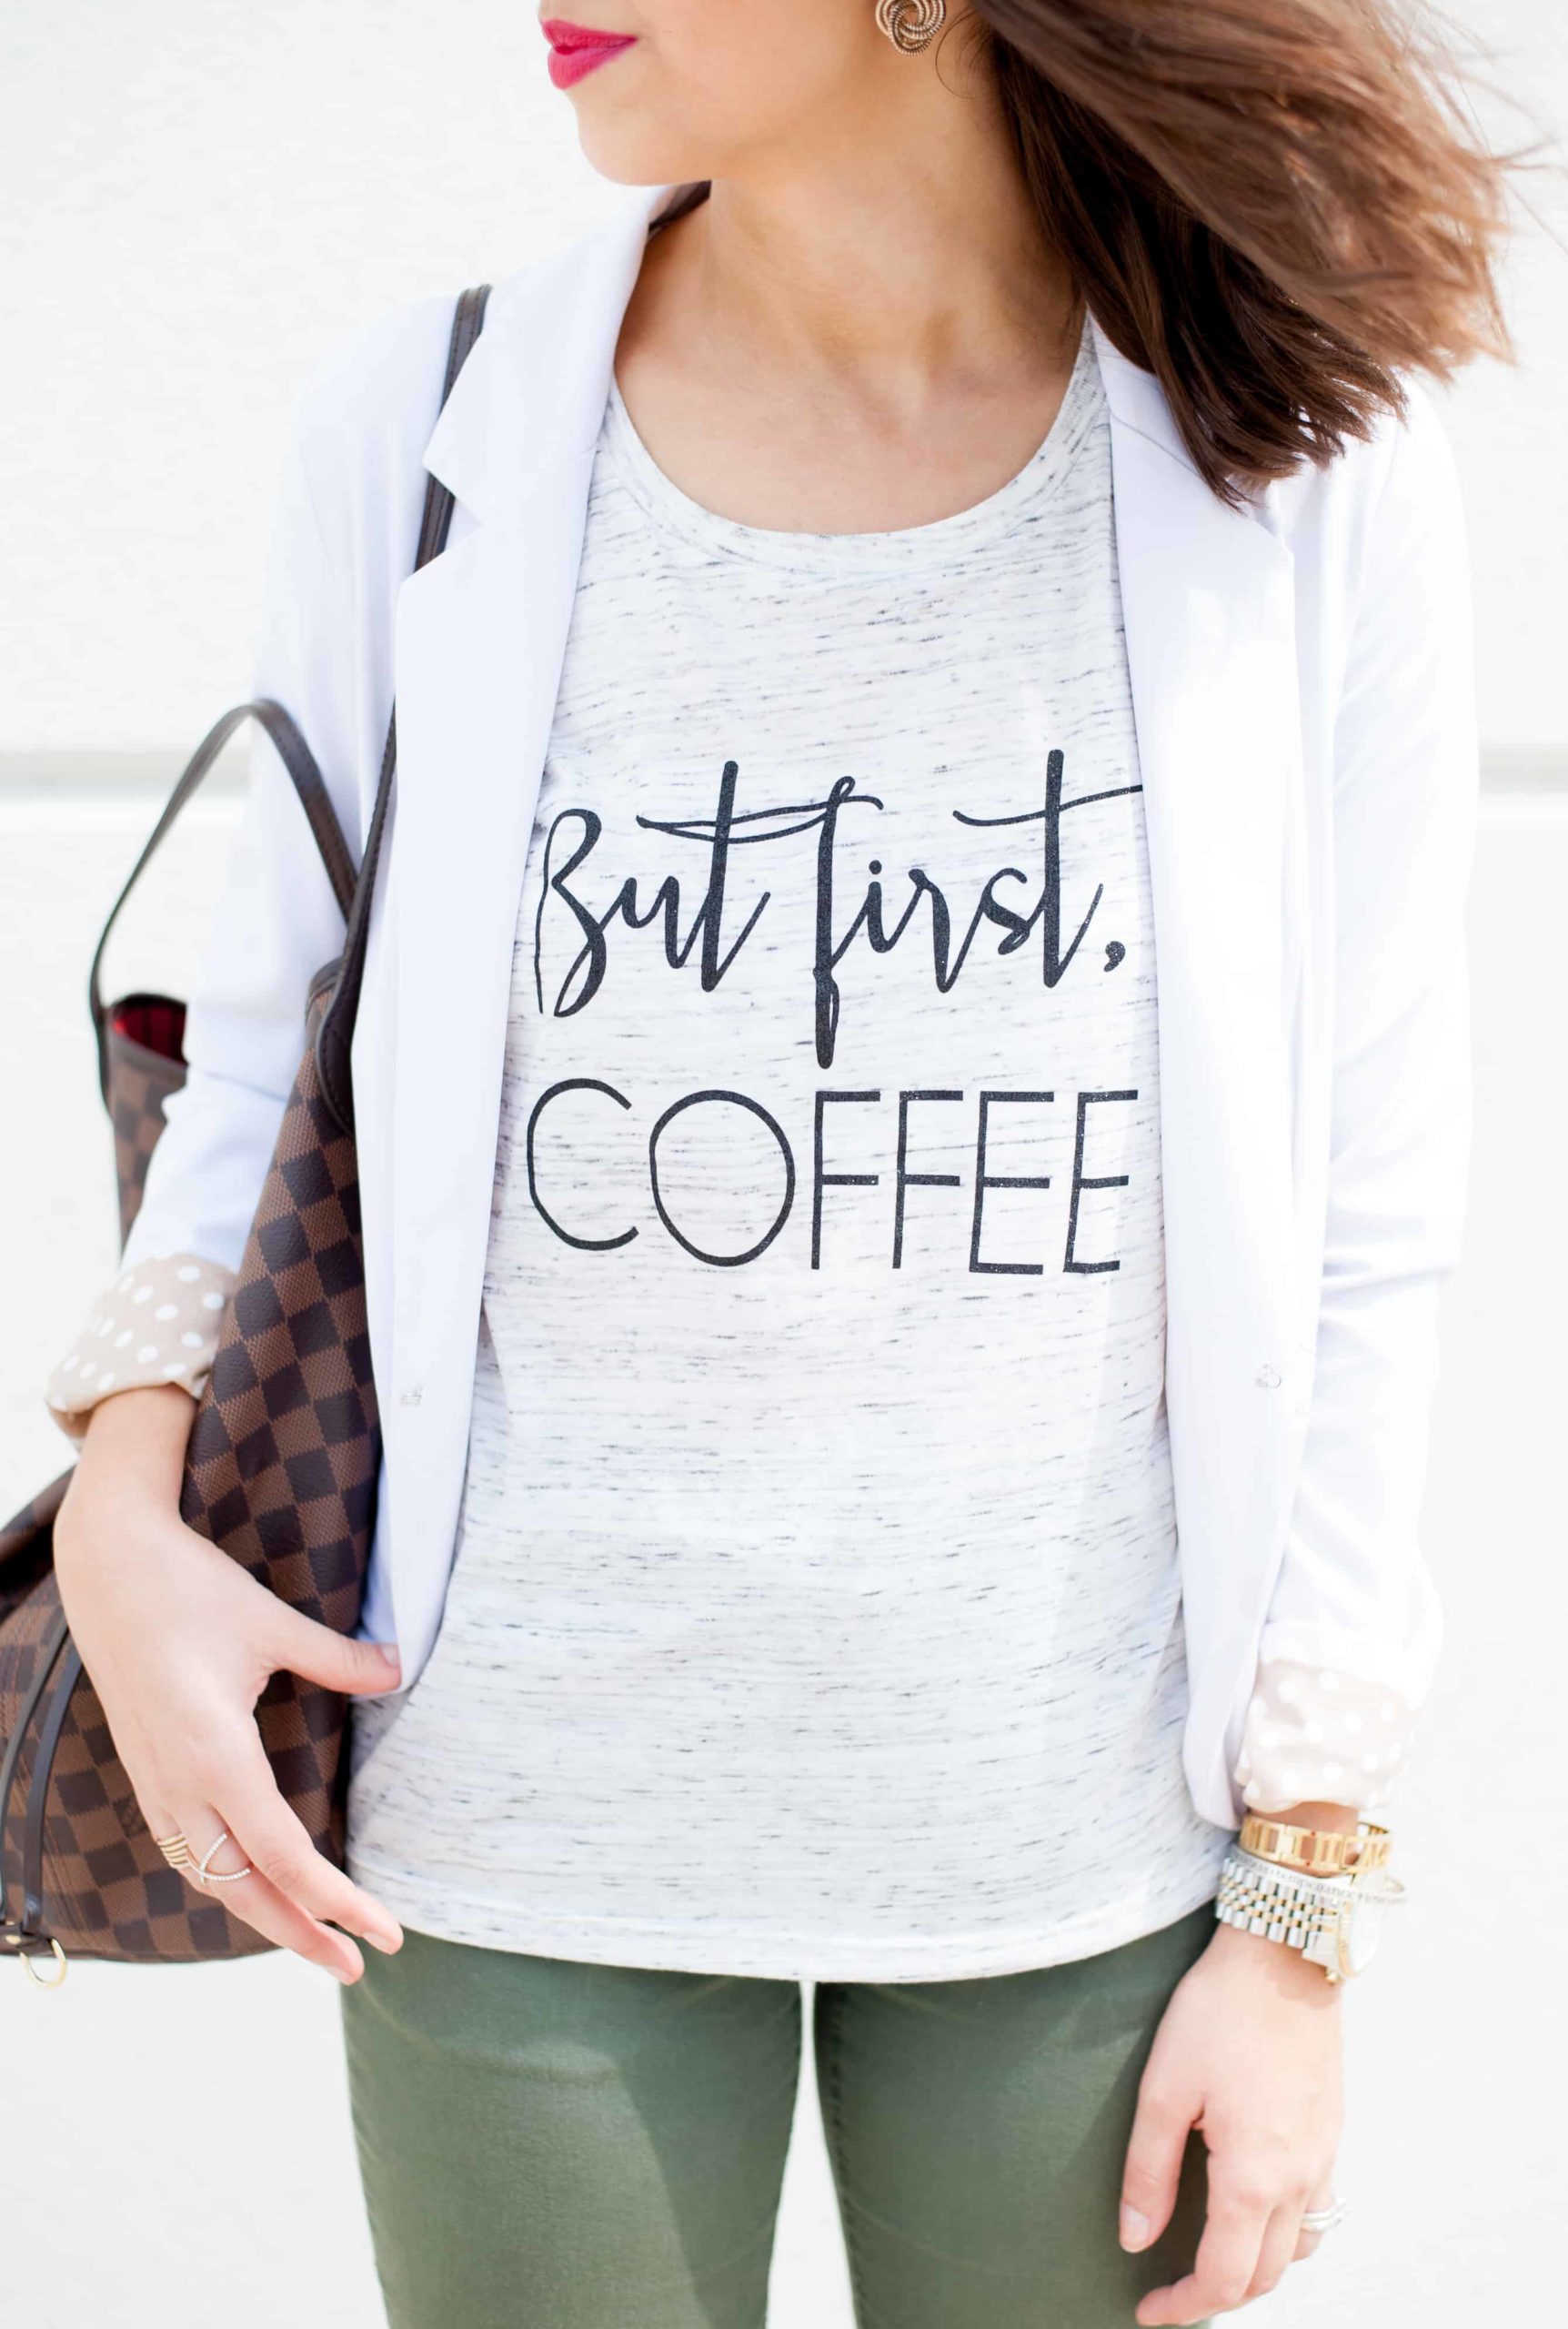 Dress Up Buttercup // A Houston-based fashion and inspiration blog developed to daily inspire your own personal style by Dede Raad | How to Dress Up A Tee to The Office